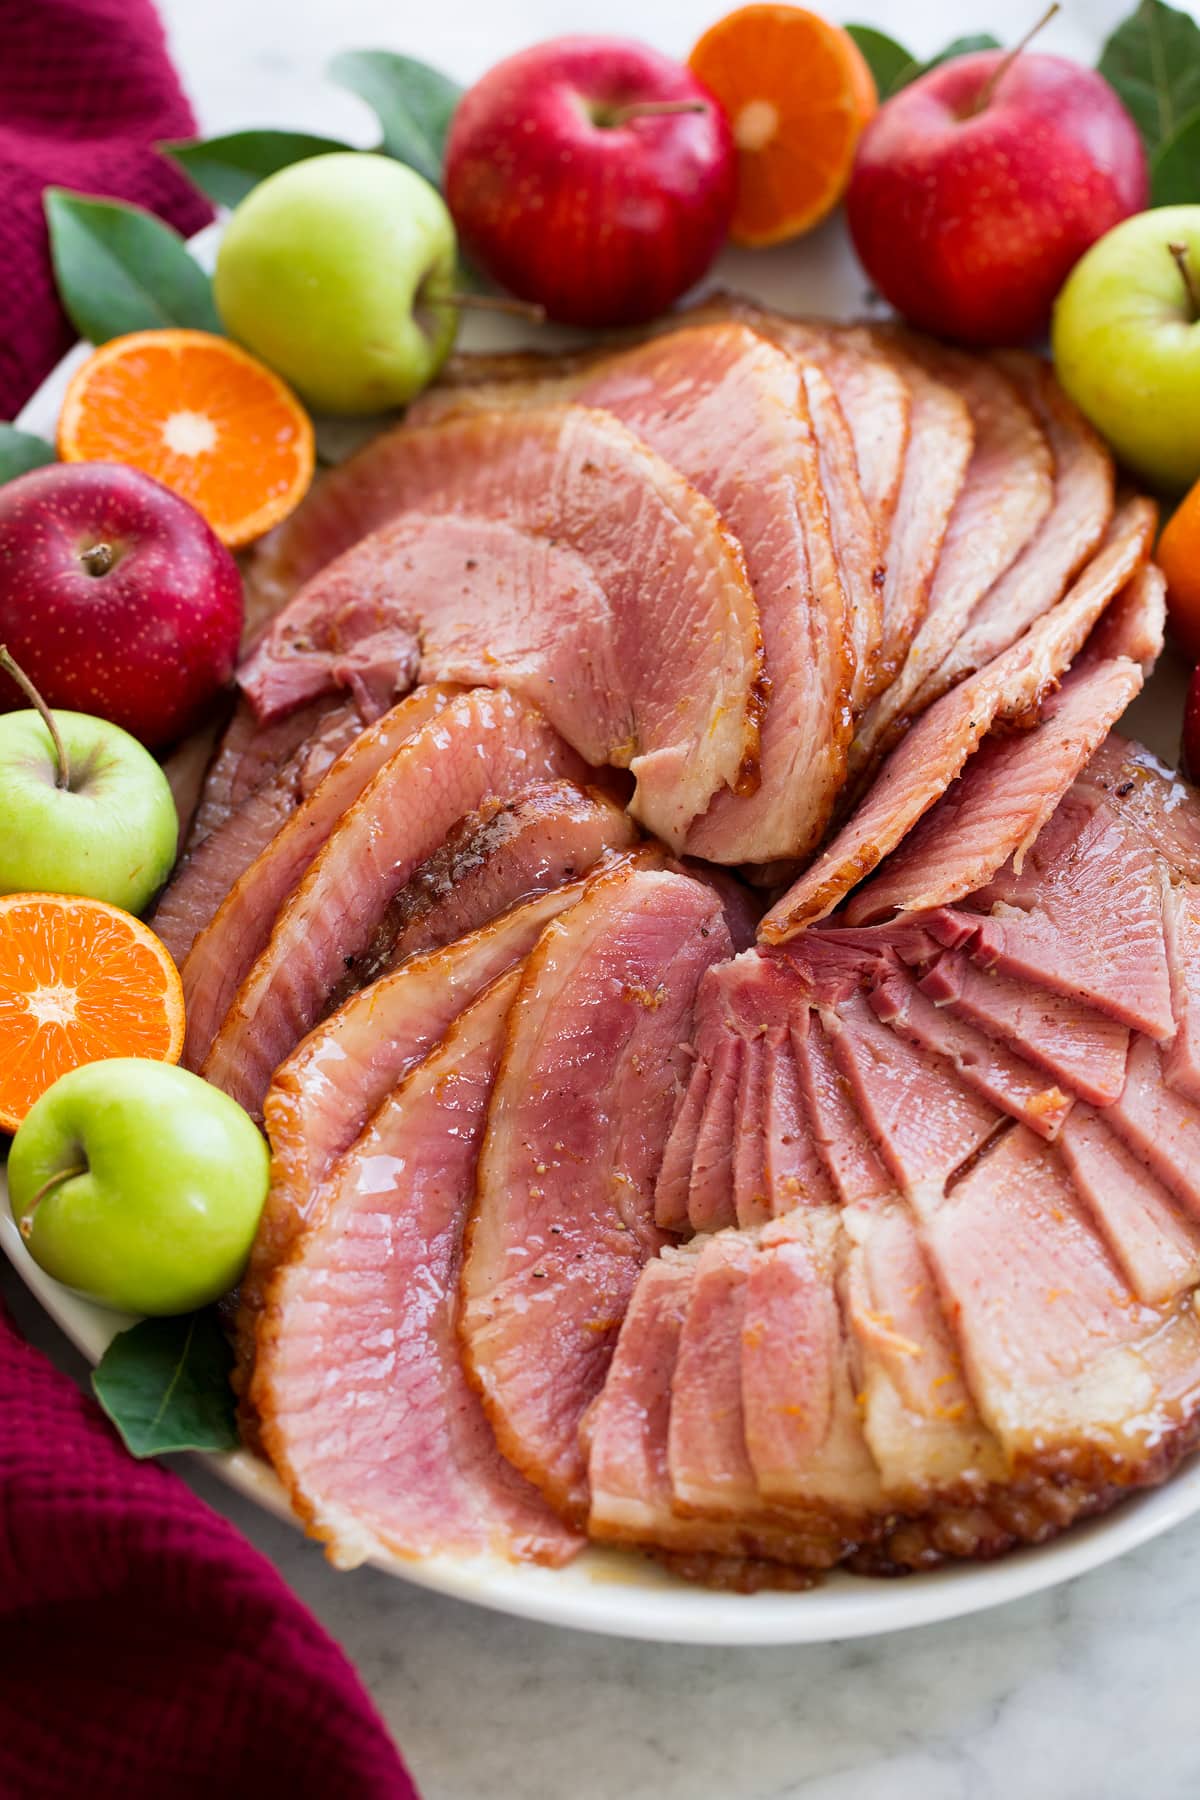 Spiral sliced ham that was cooked in a slow cooker shown on an oval white serving platter close up with decorative fruit and herbs to the sides.